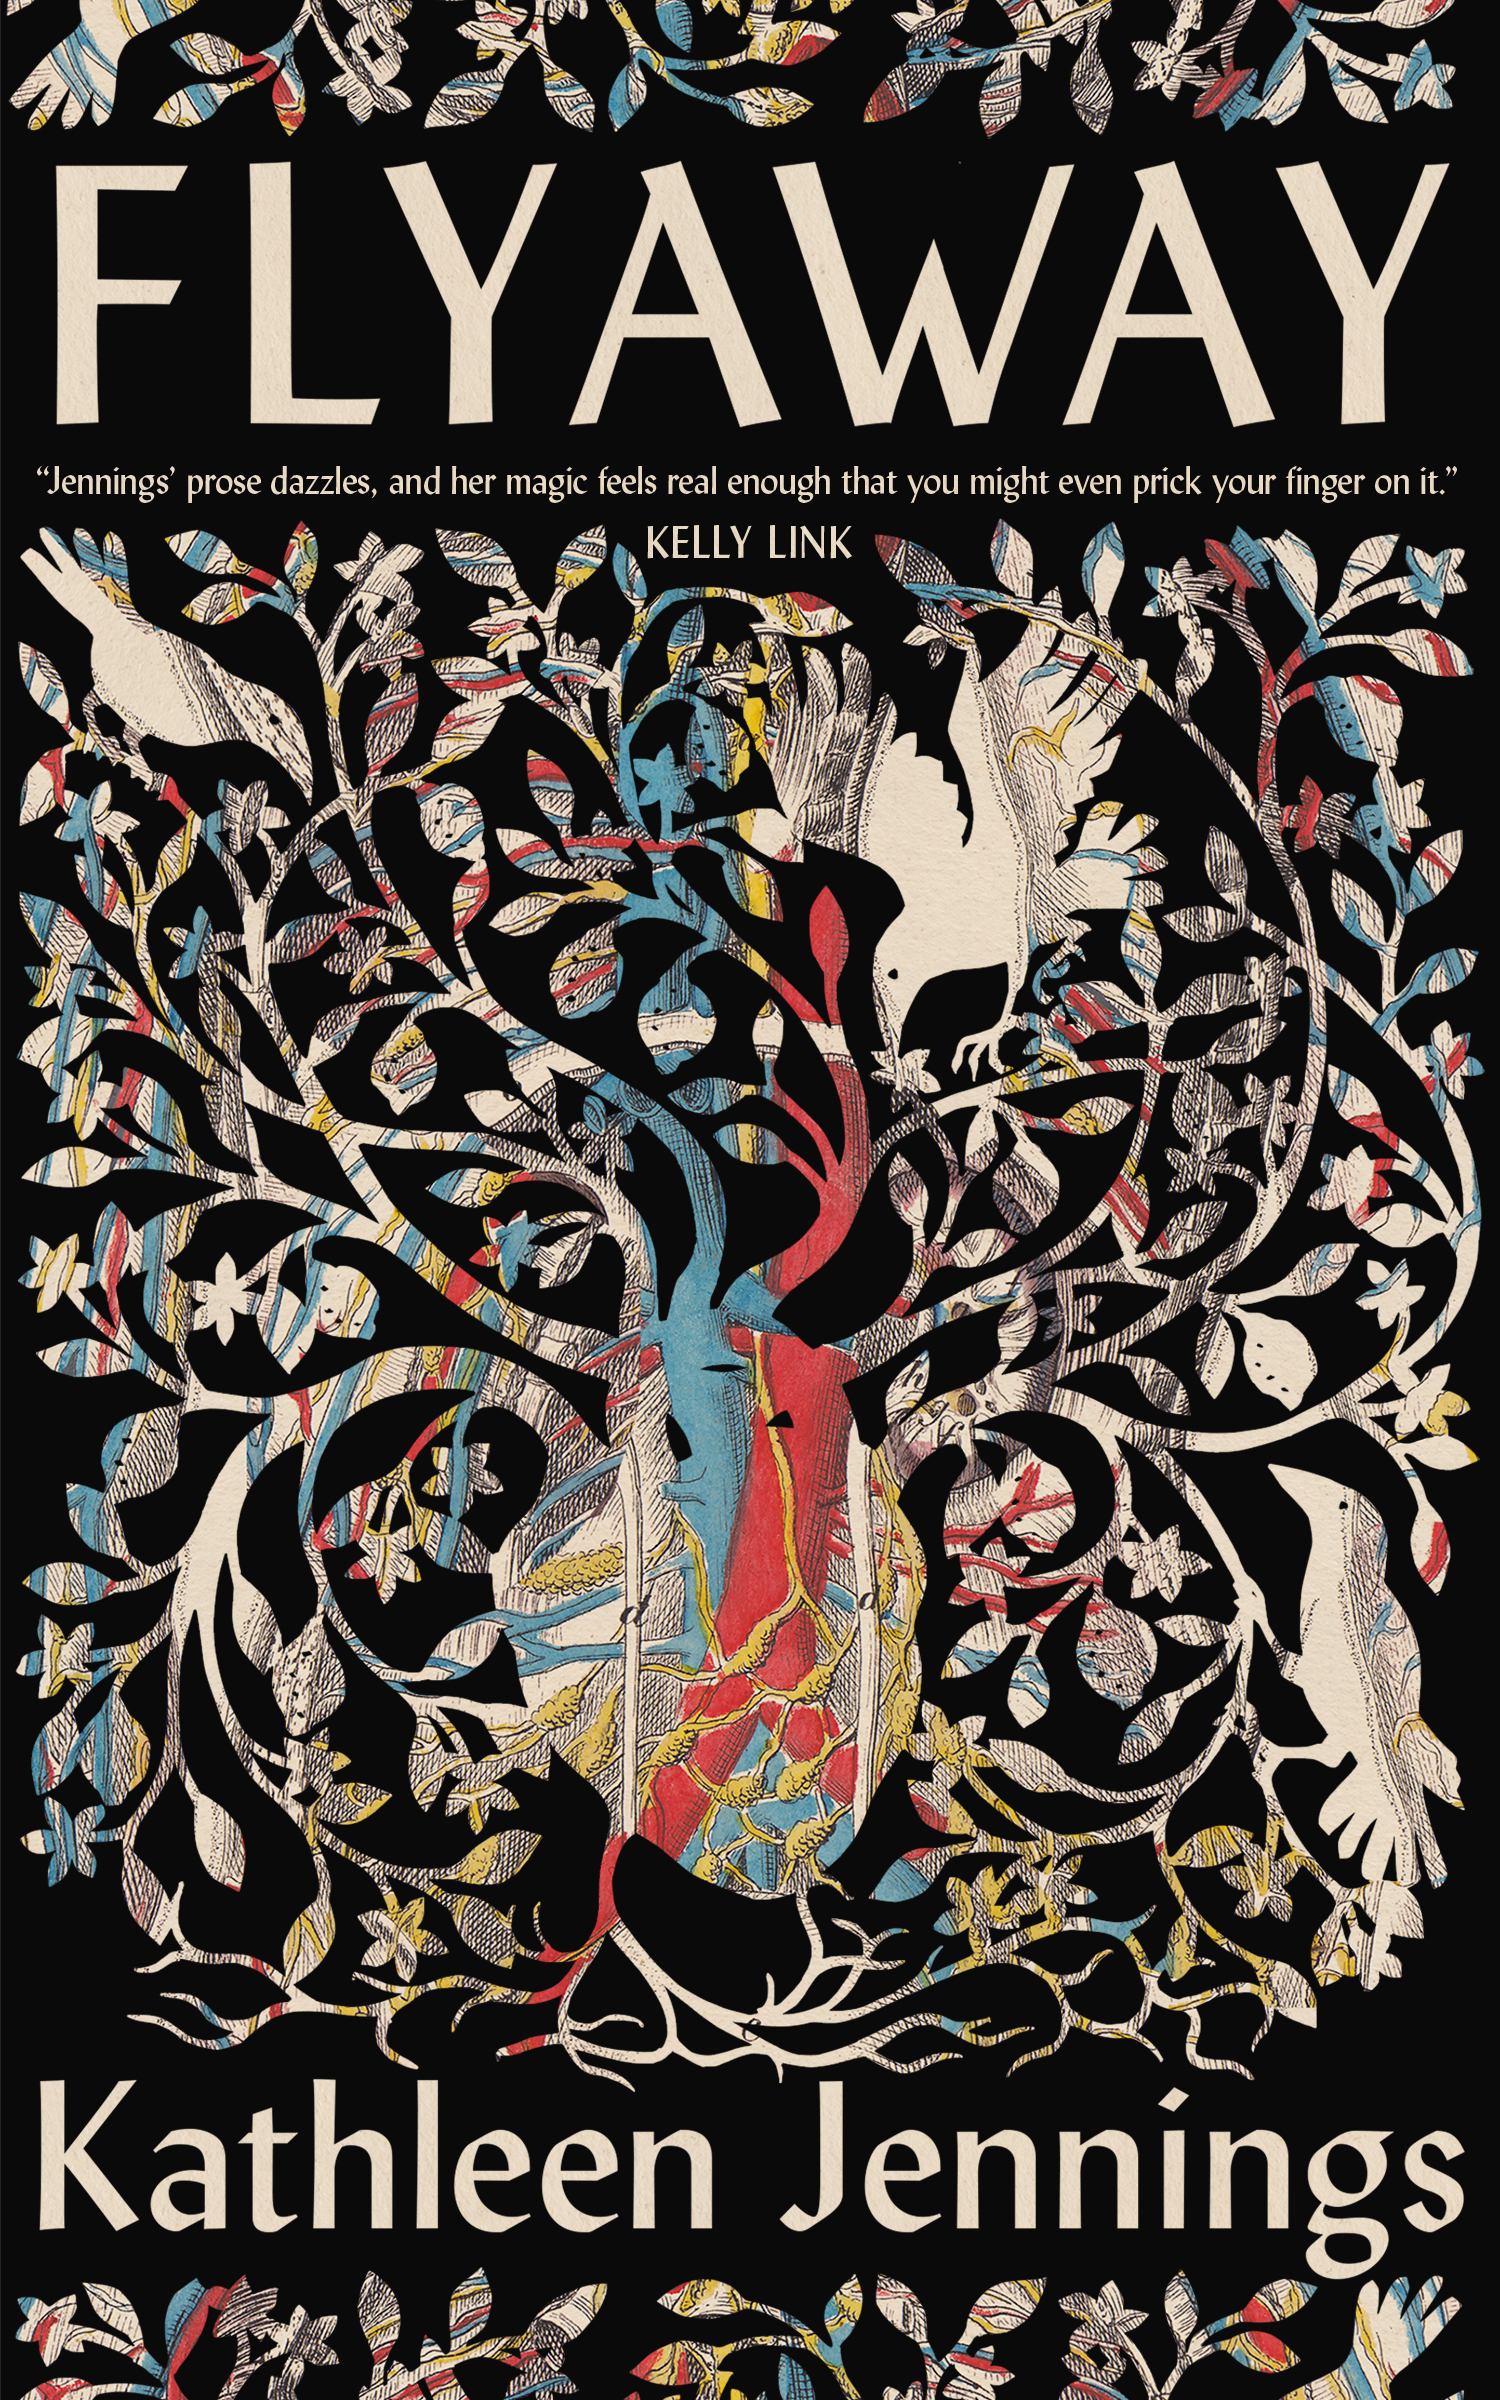 Image of the cover of Kathleen Jennings' FLYAWAY, featuring a cutout of a heart with vines in place of arteries and birds in the vines.